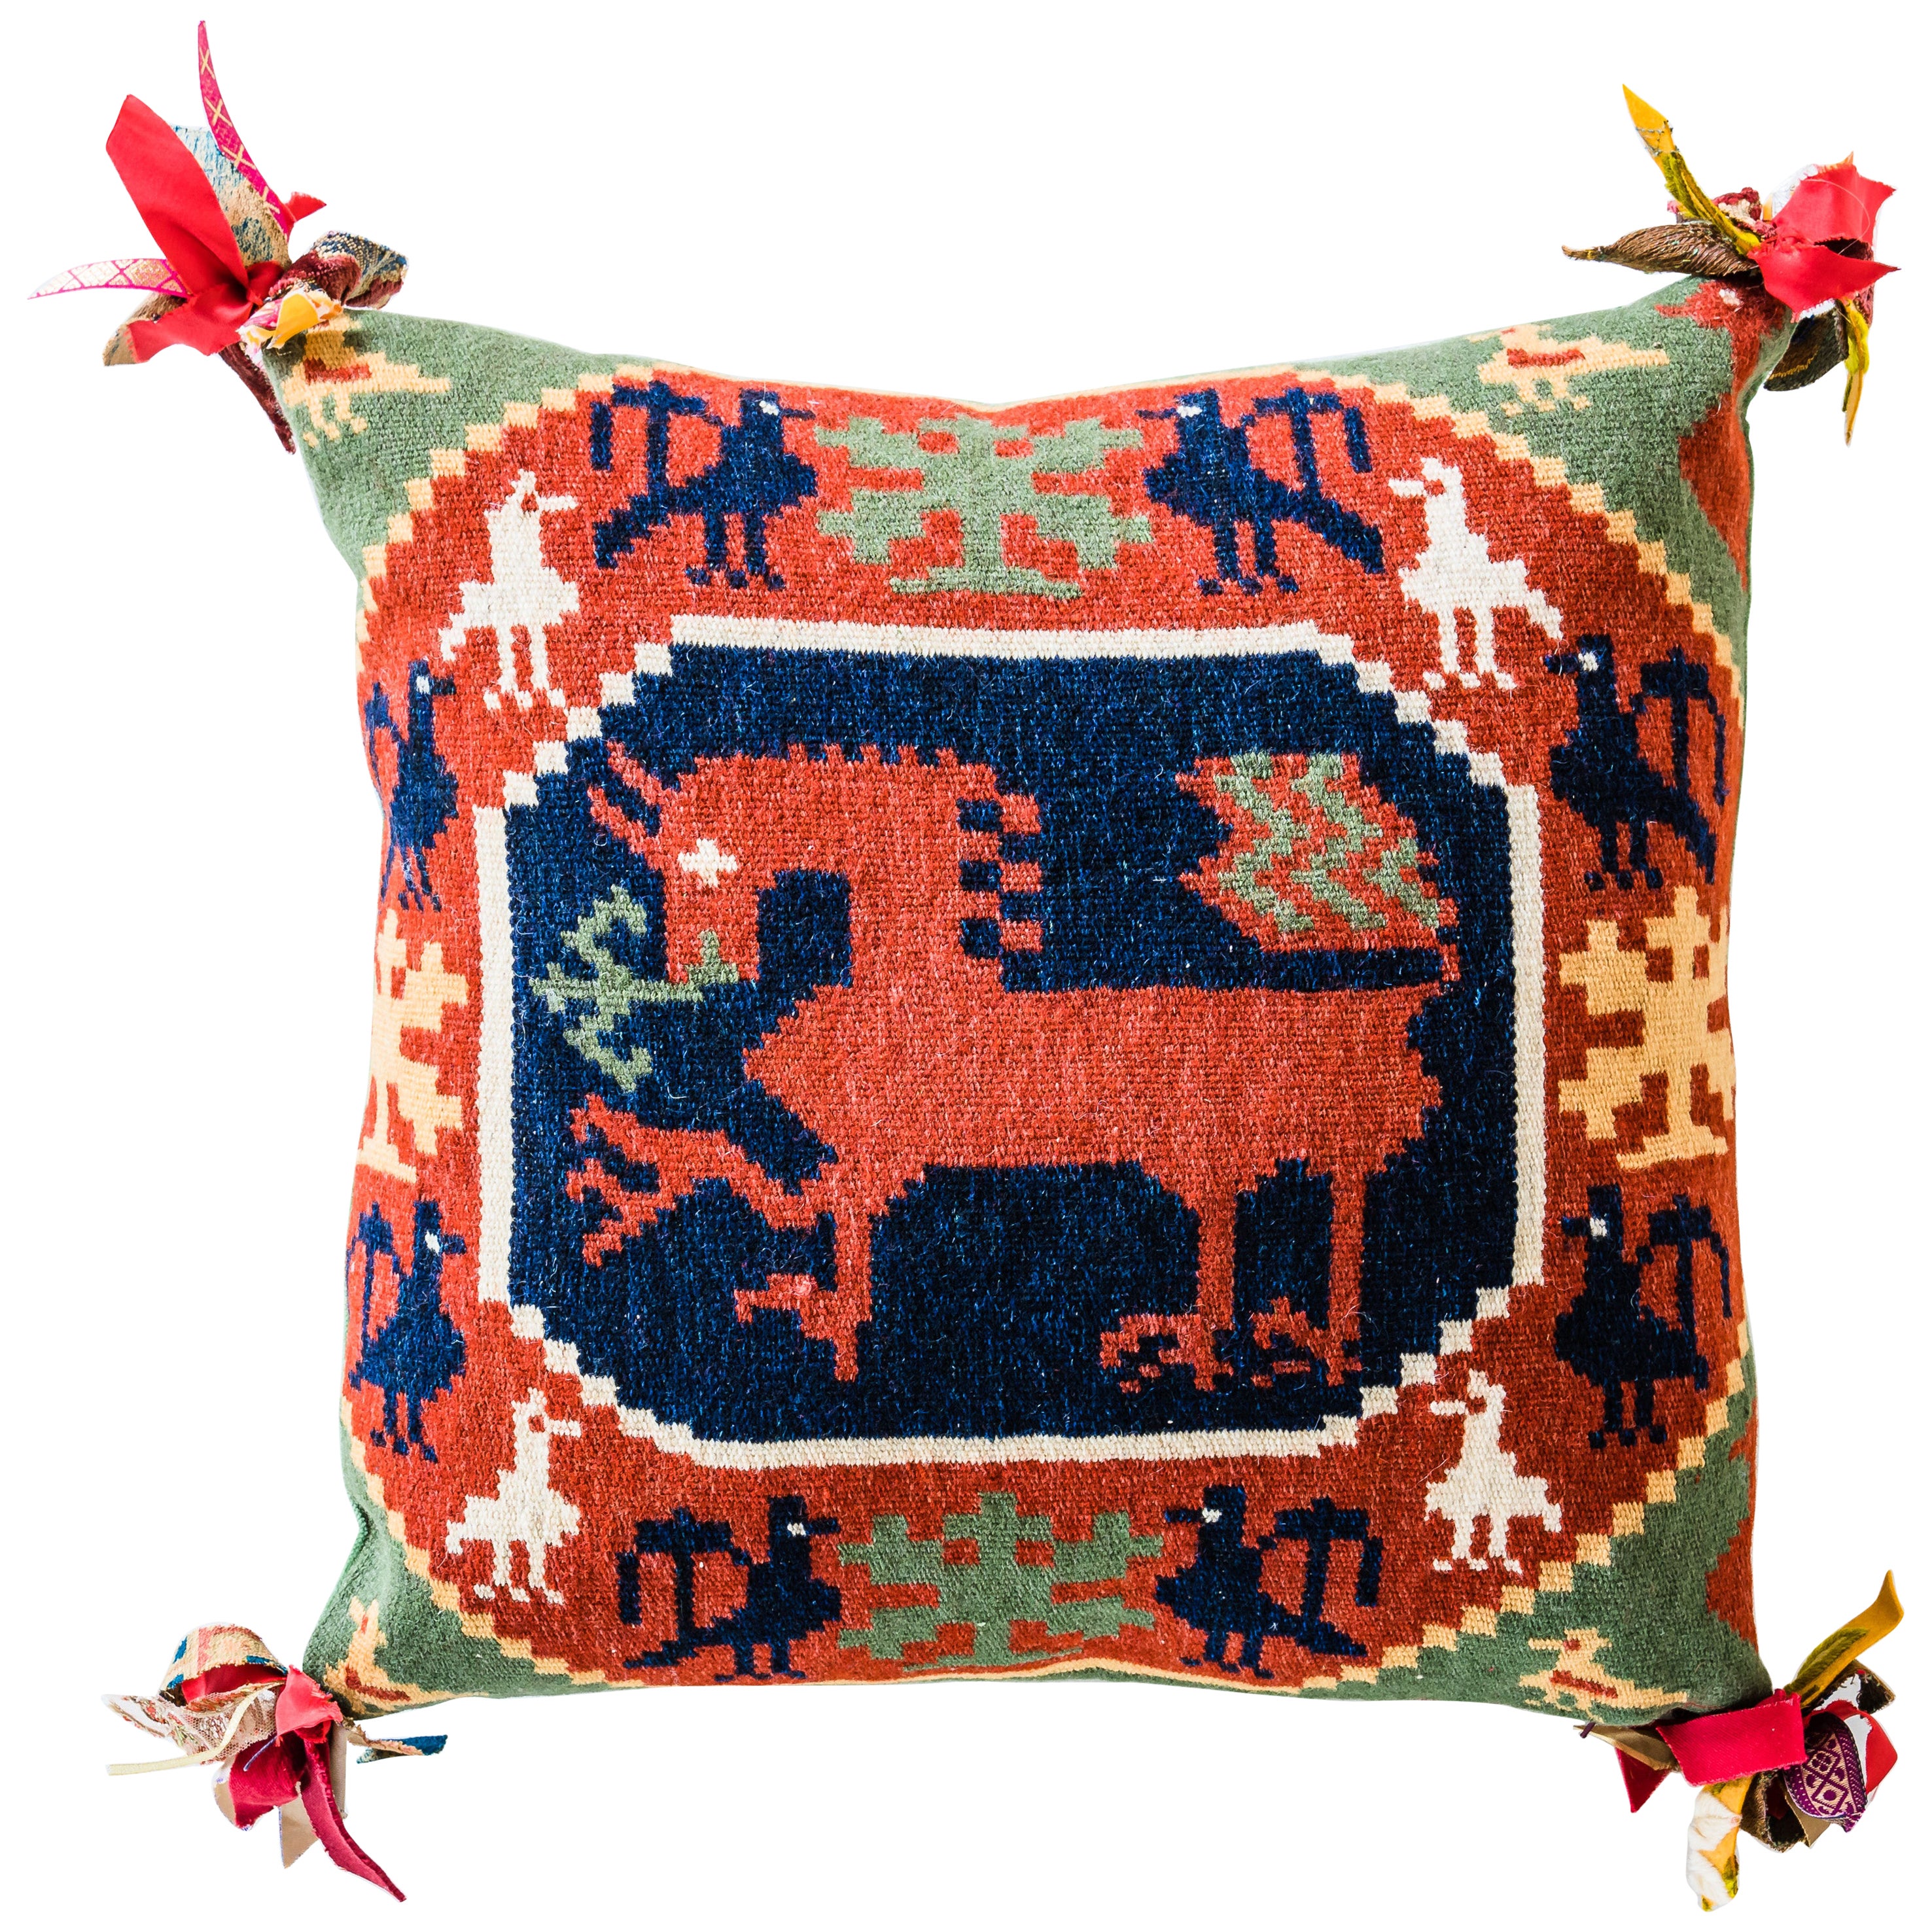 Early 20th Century Swedish Flemish Weave Pillow “Brook Horse” For Sale